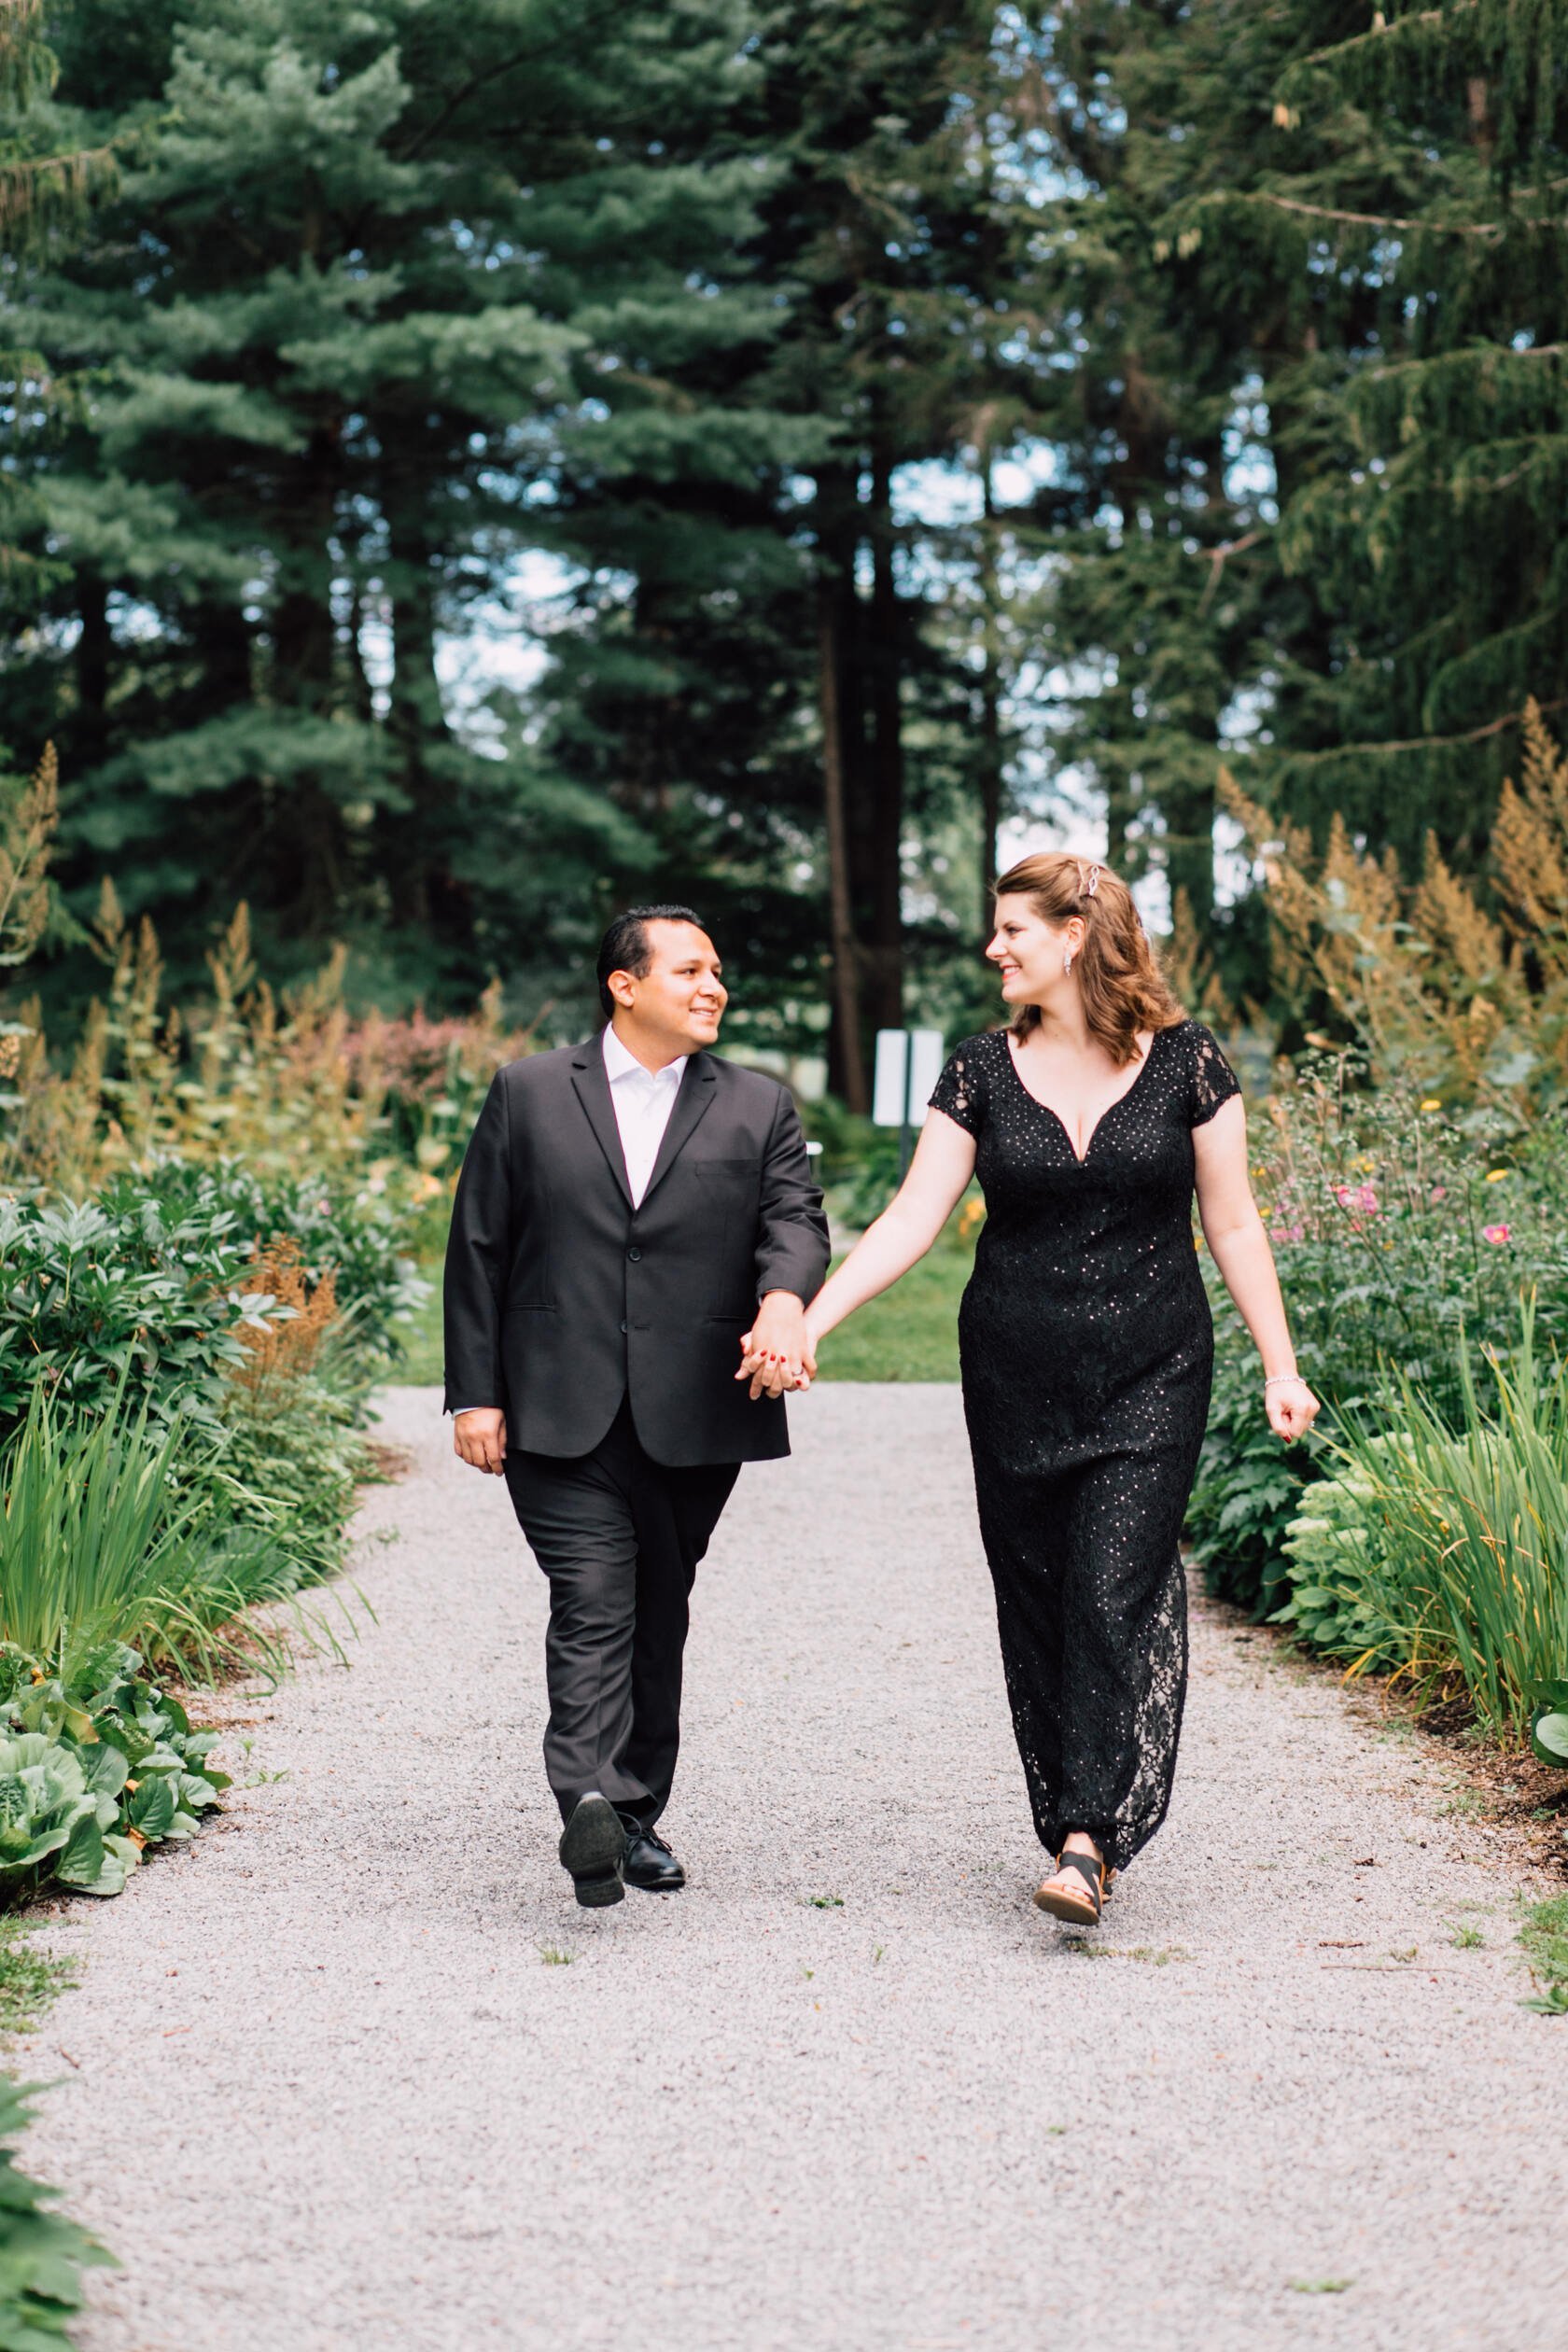  A married couple dressed in all black smile at each other as they walk hand in hand along a gravel path in a garden for anniversary photos 